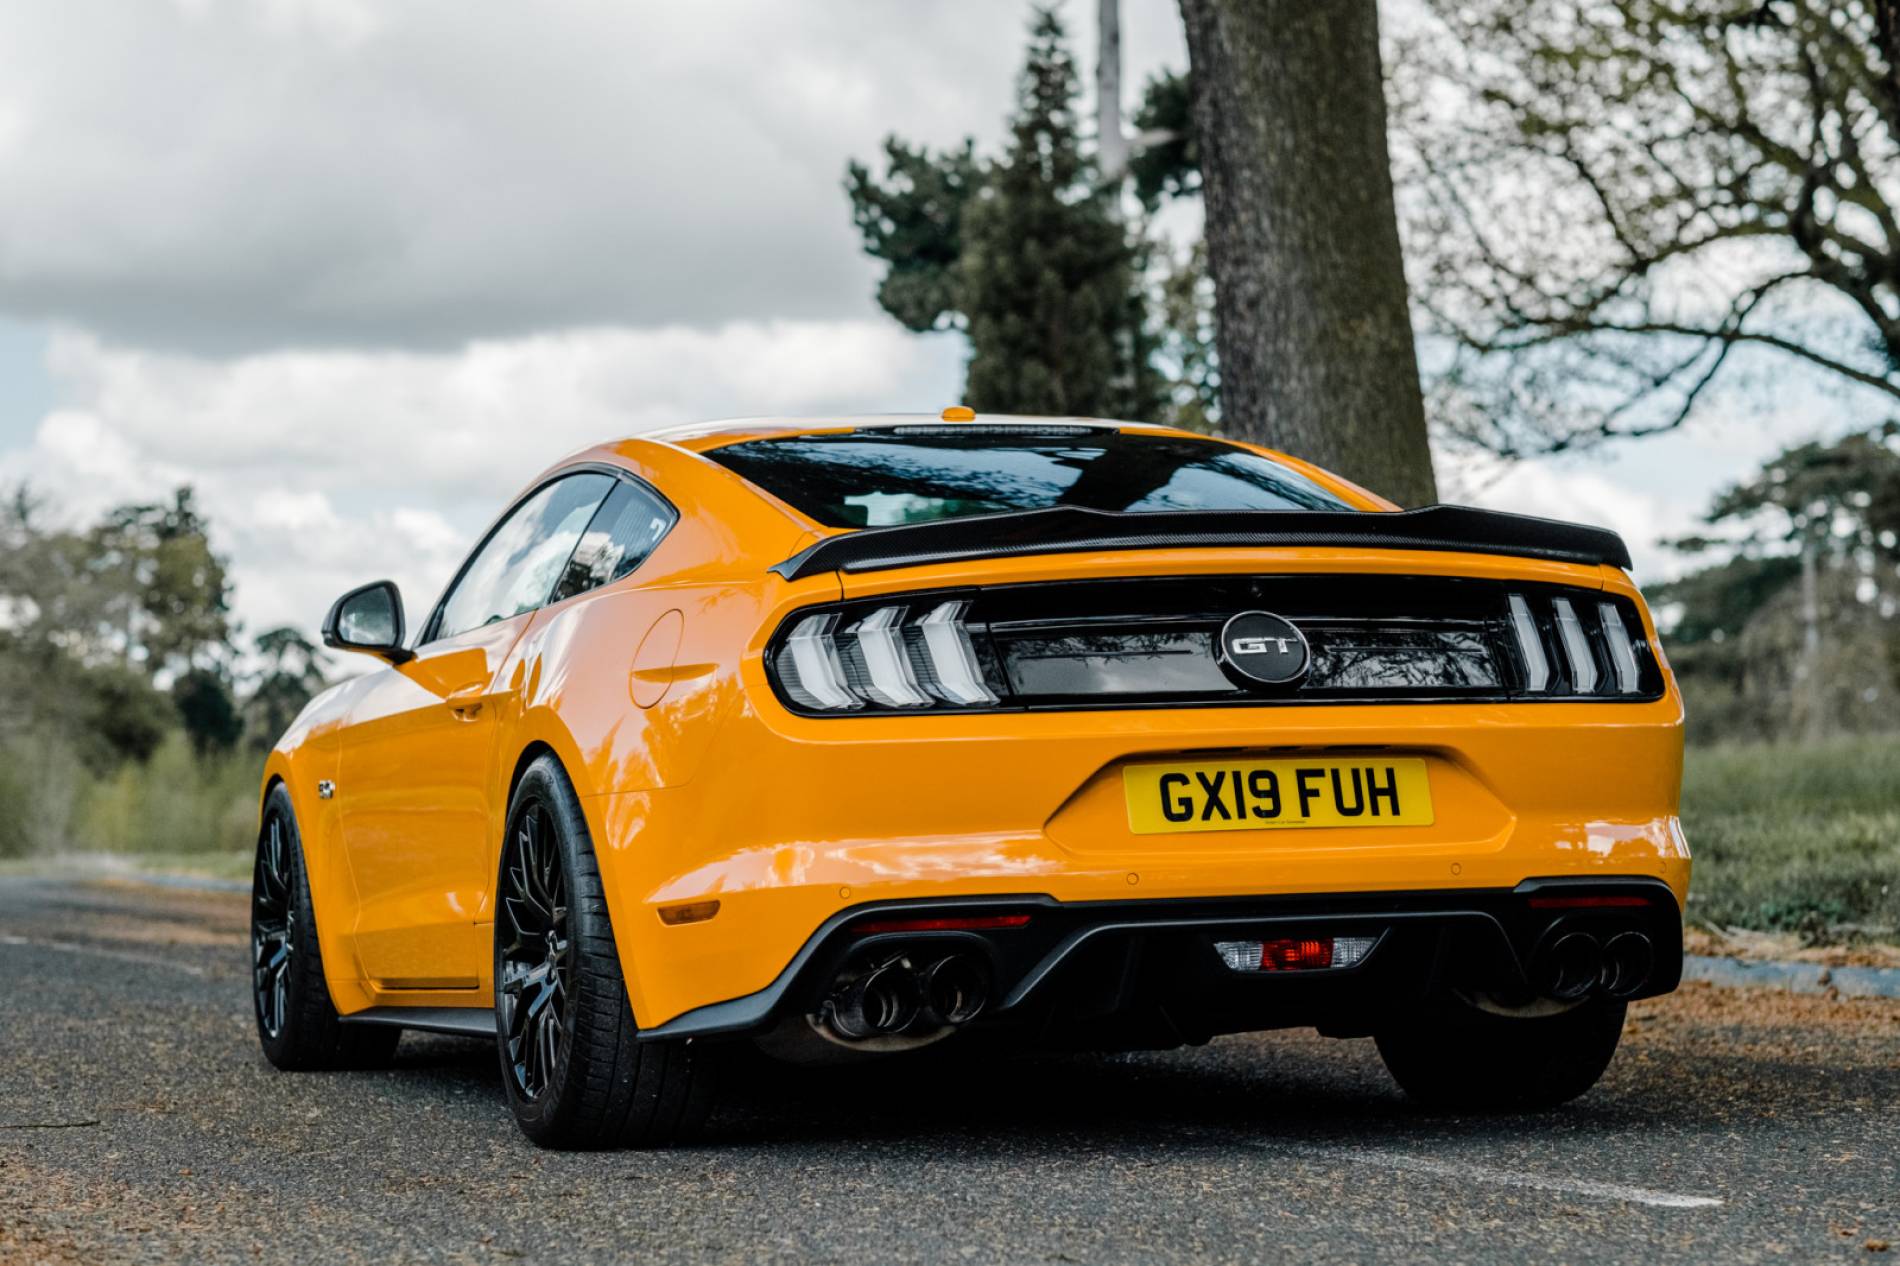 Stage 3 Supercharged Mustang - 780BHP + £2000 or £38,000 Tax Free Cash alternative